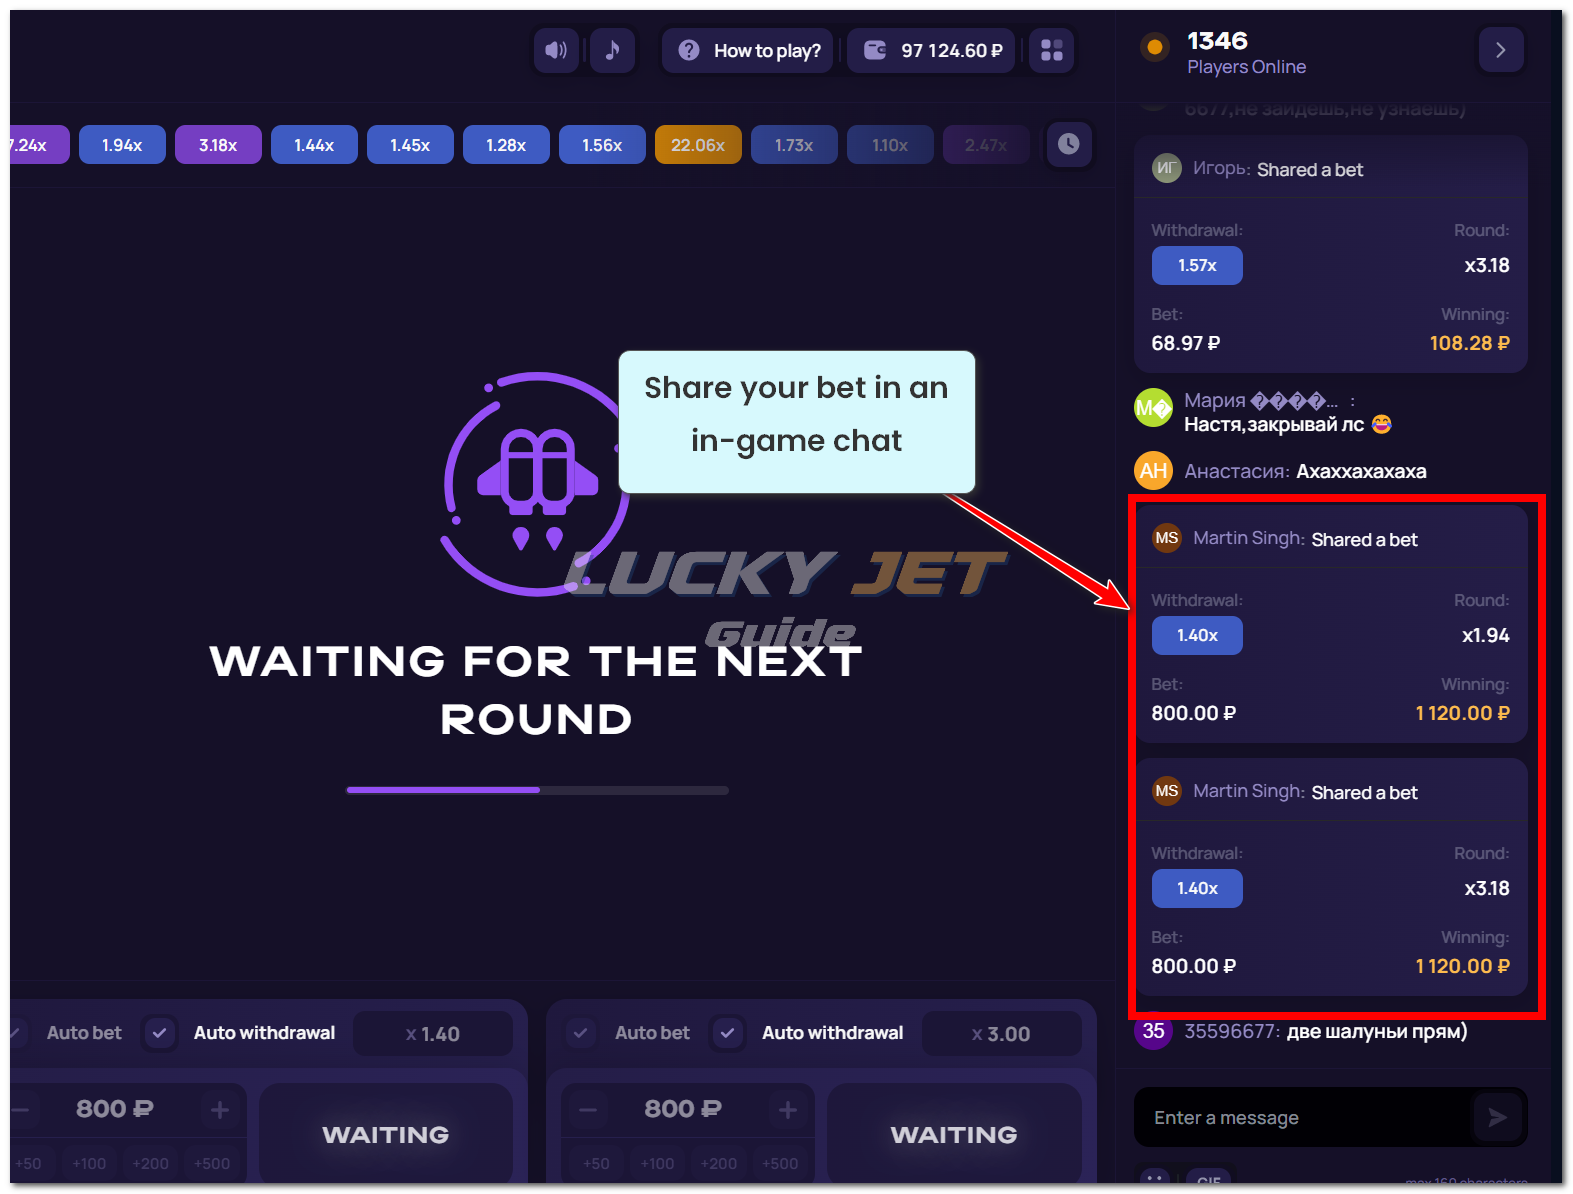 Share your bet in 1Win Lucky Jet